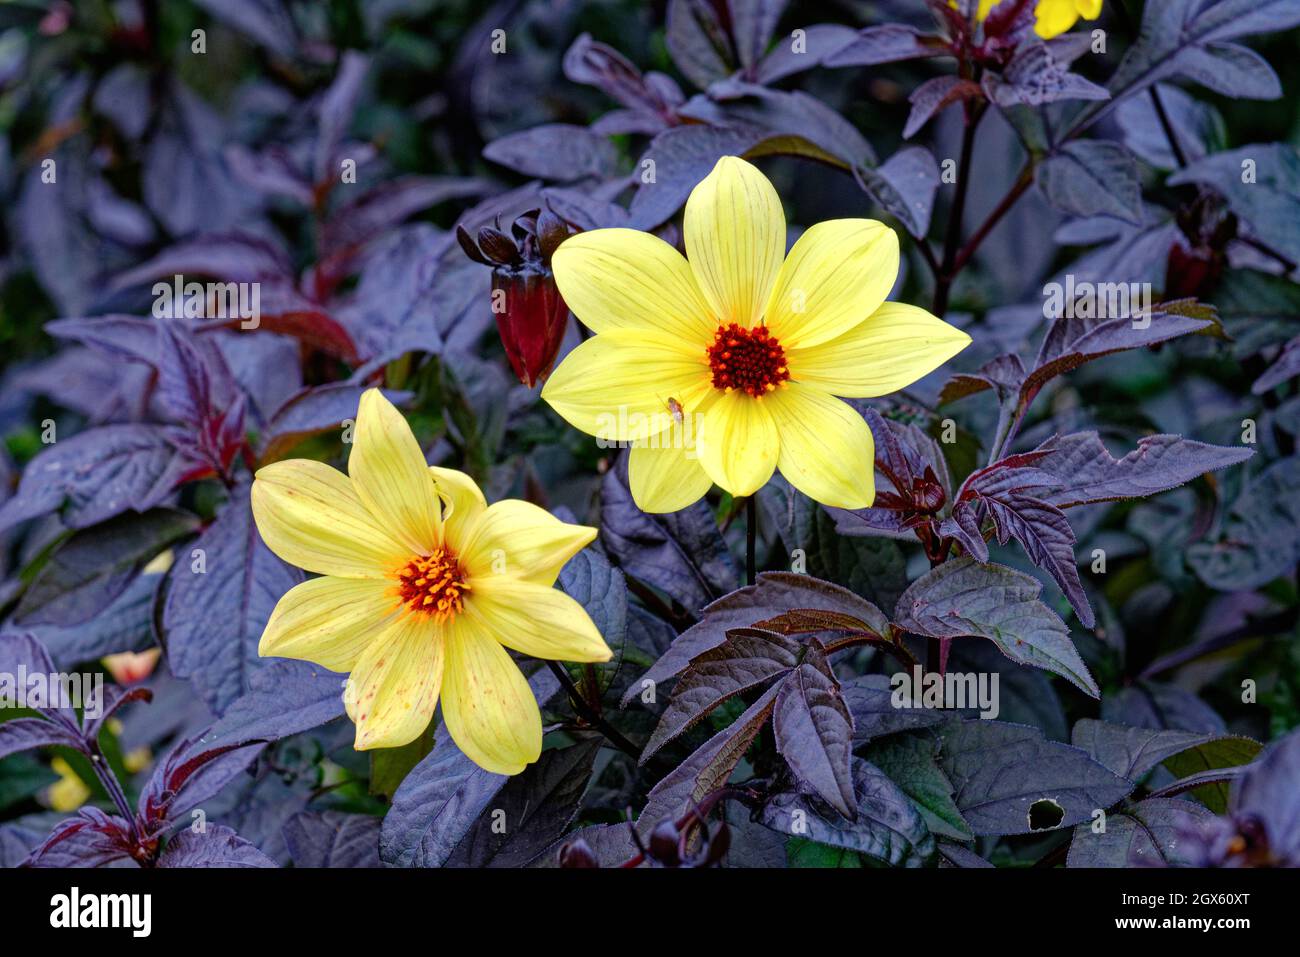 Close up of Dahlia Knockout flowerhead in full bloom against dark foliage Stock Photo